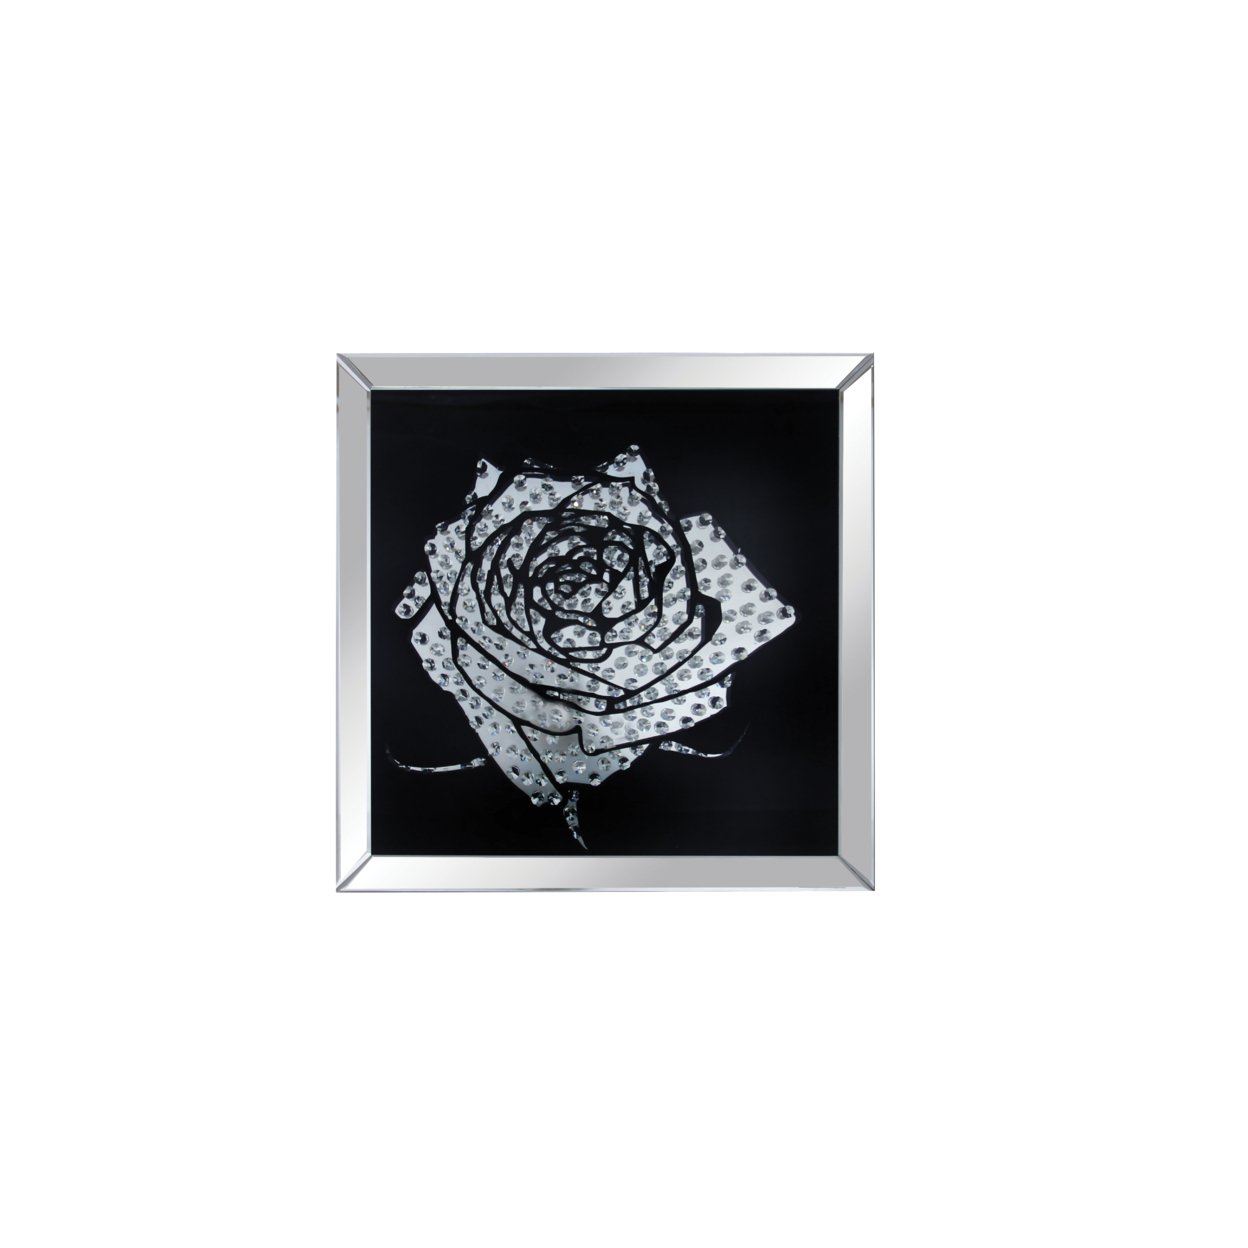 Square Shape Mirror Framed Rose Wall Decor With Crystal Inlays, Black & Silver- Saltoro Sherpi